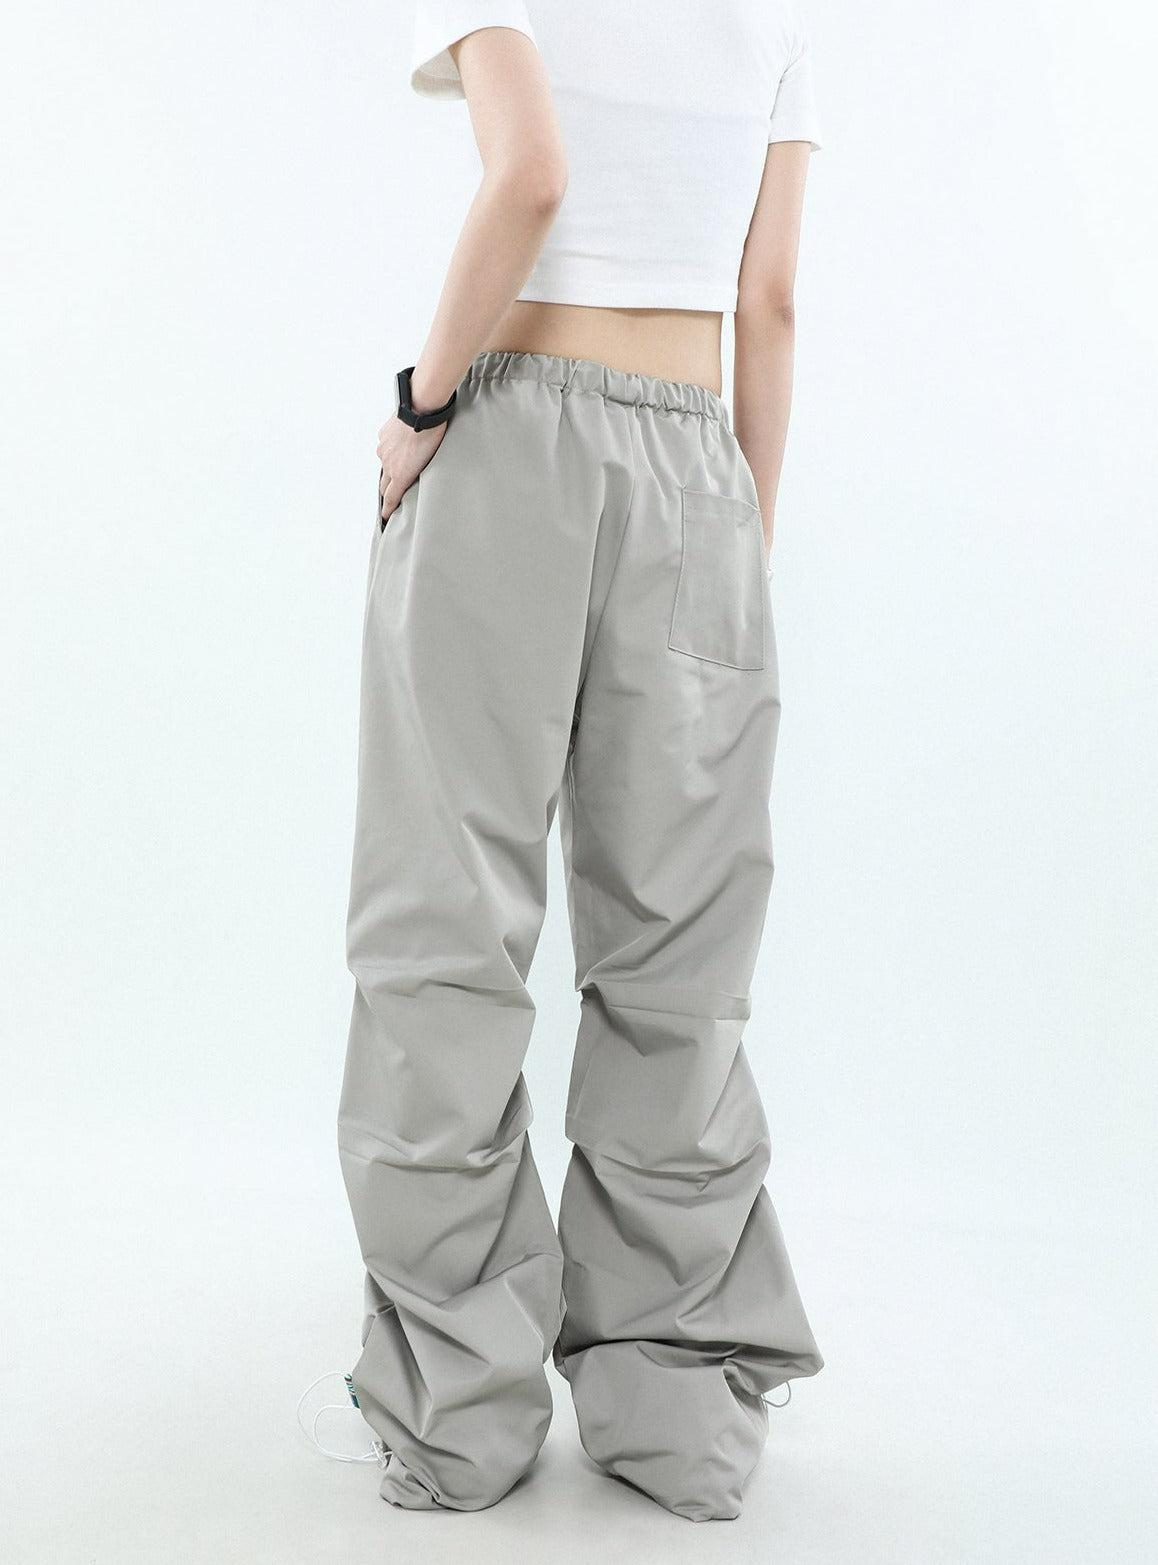 Mr Nearly Fold Pleated Drawstring Pants Korean Street Fashion Pants By Mr Nearly Shop Online at OH Vault